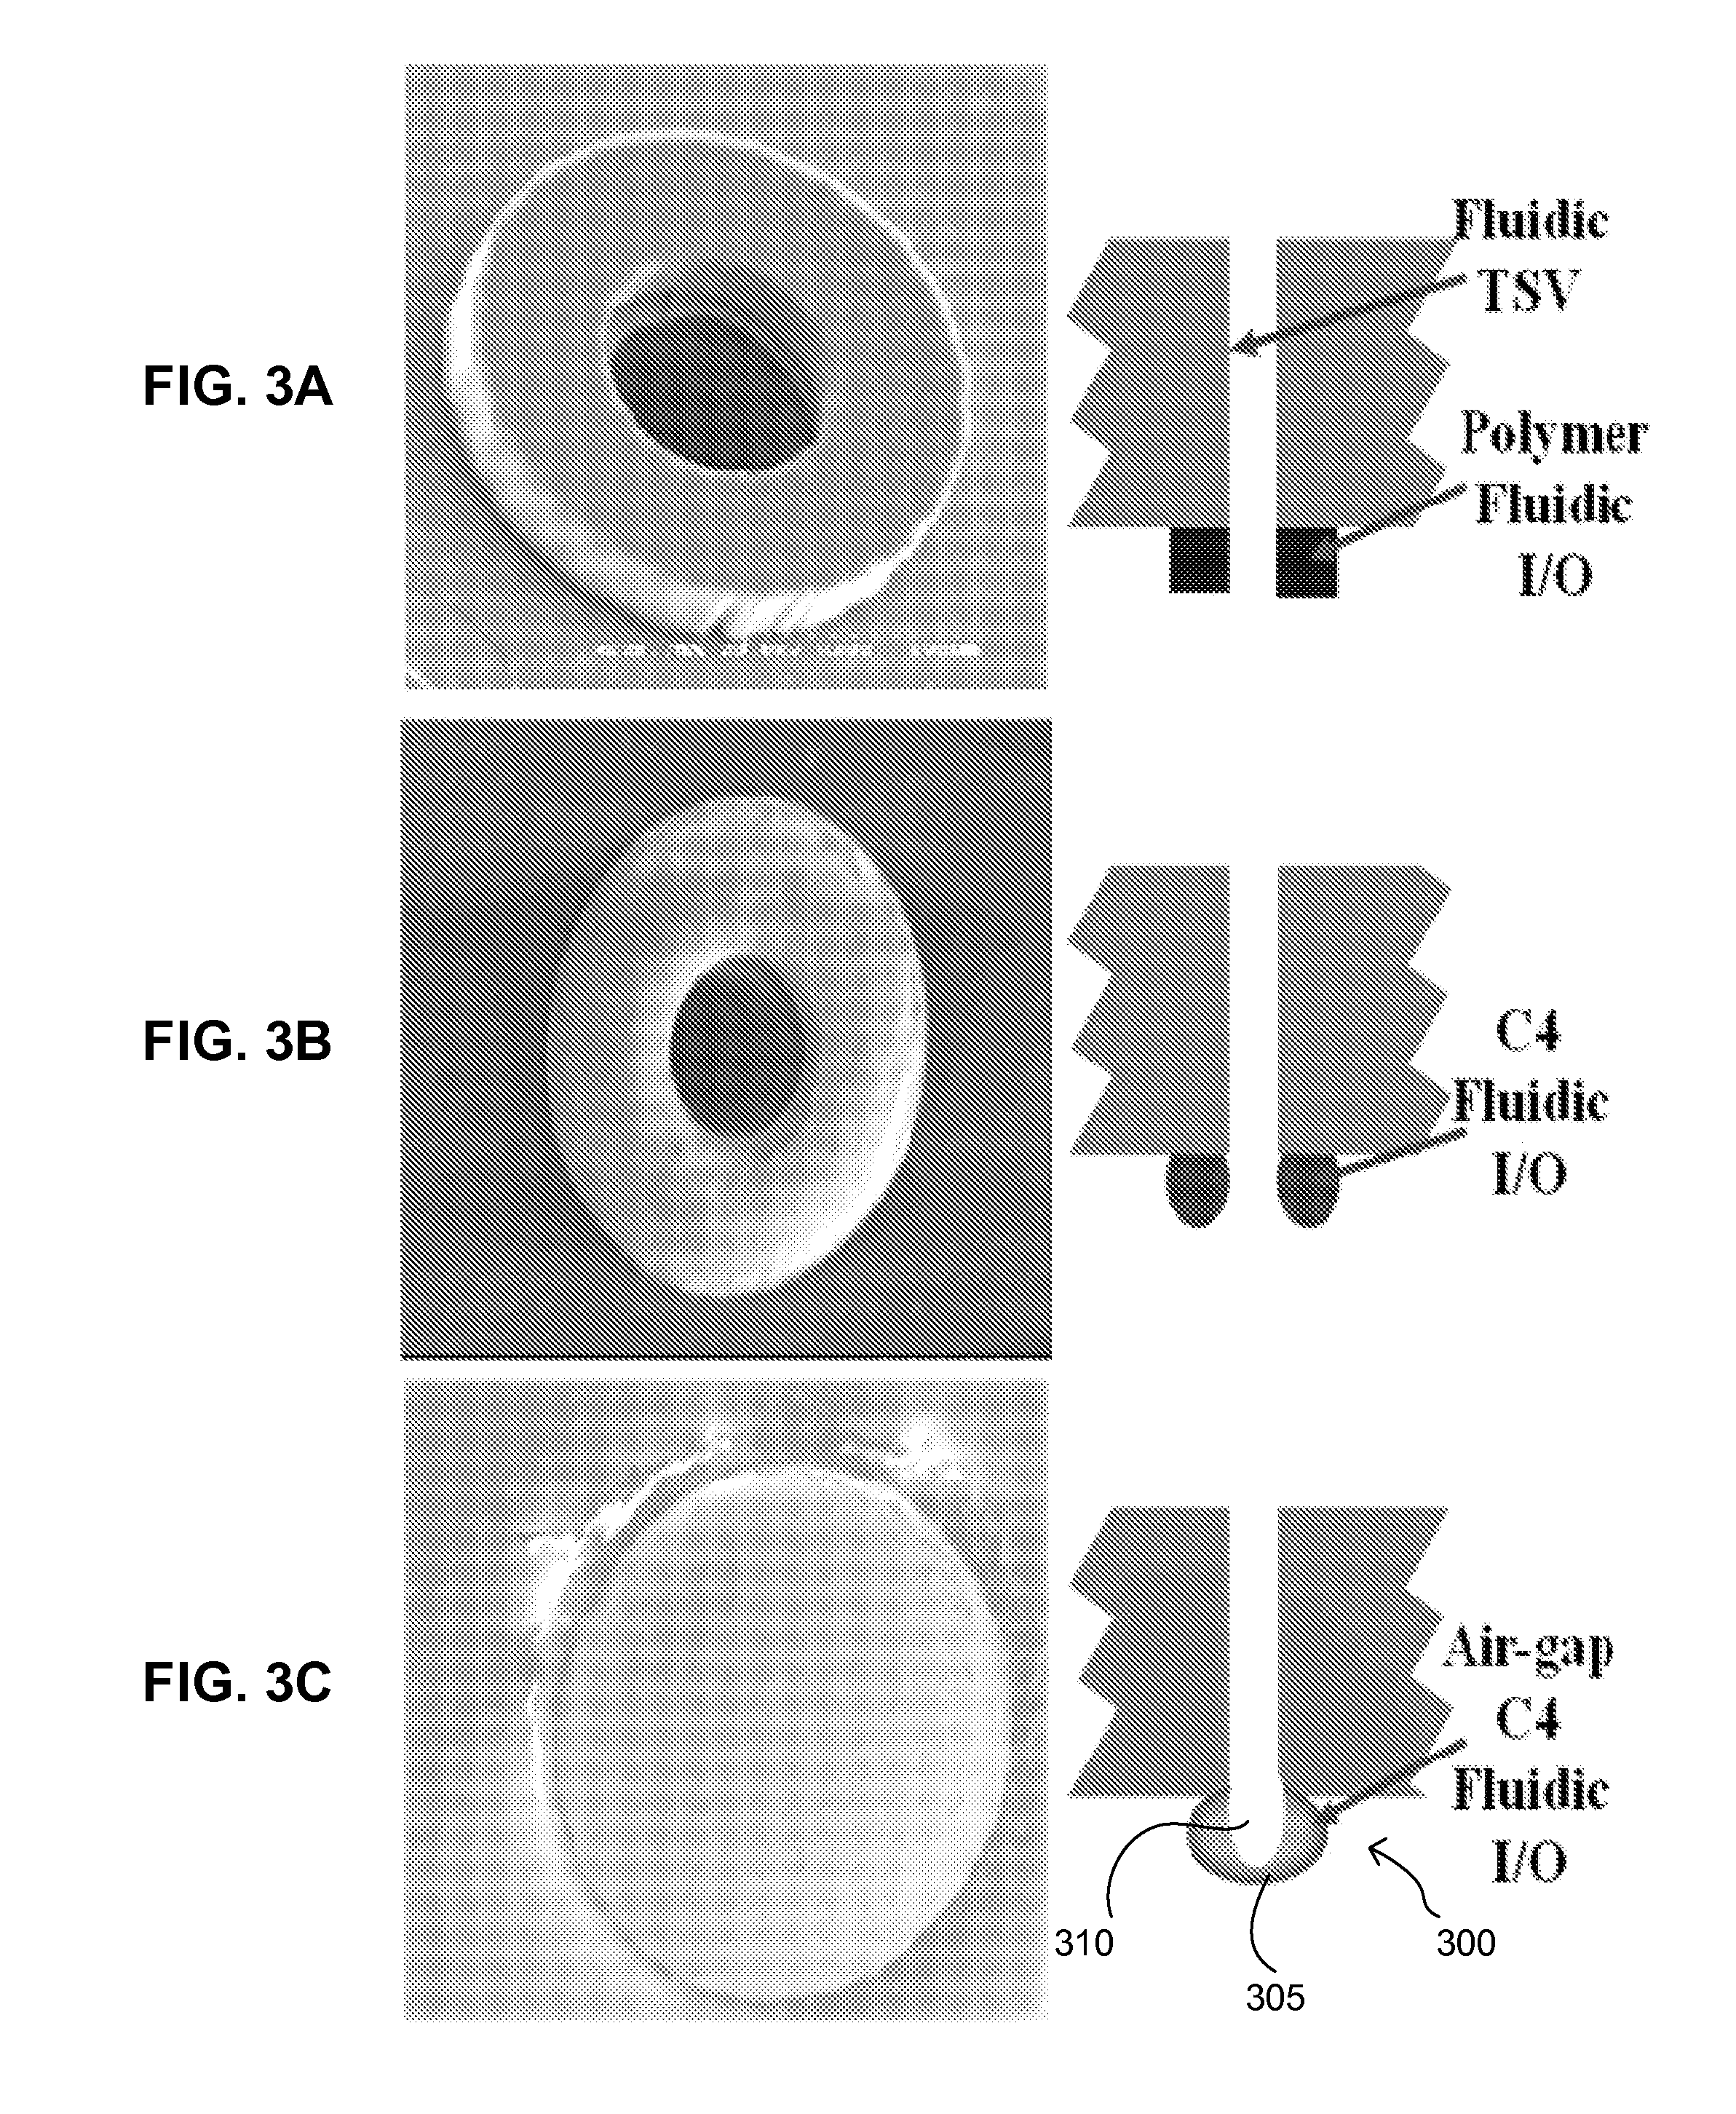 Air-gap c4 fluidic I/O interconnects and methods of fabricating same